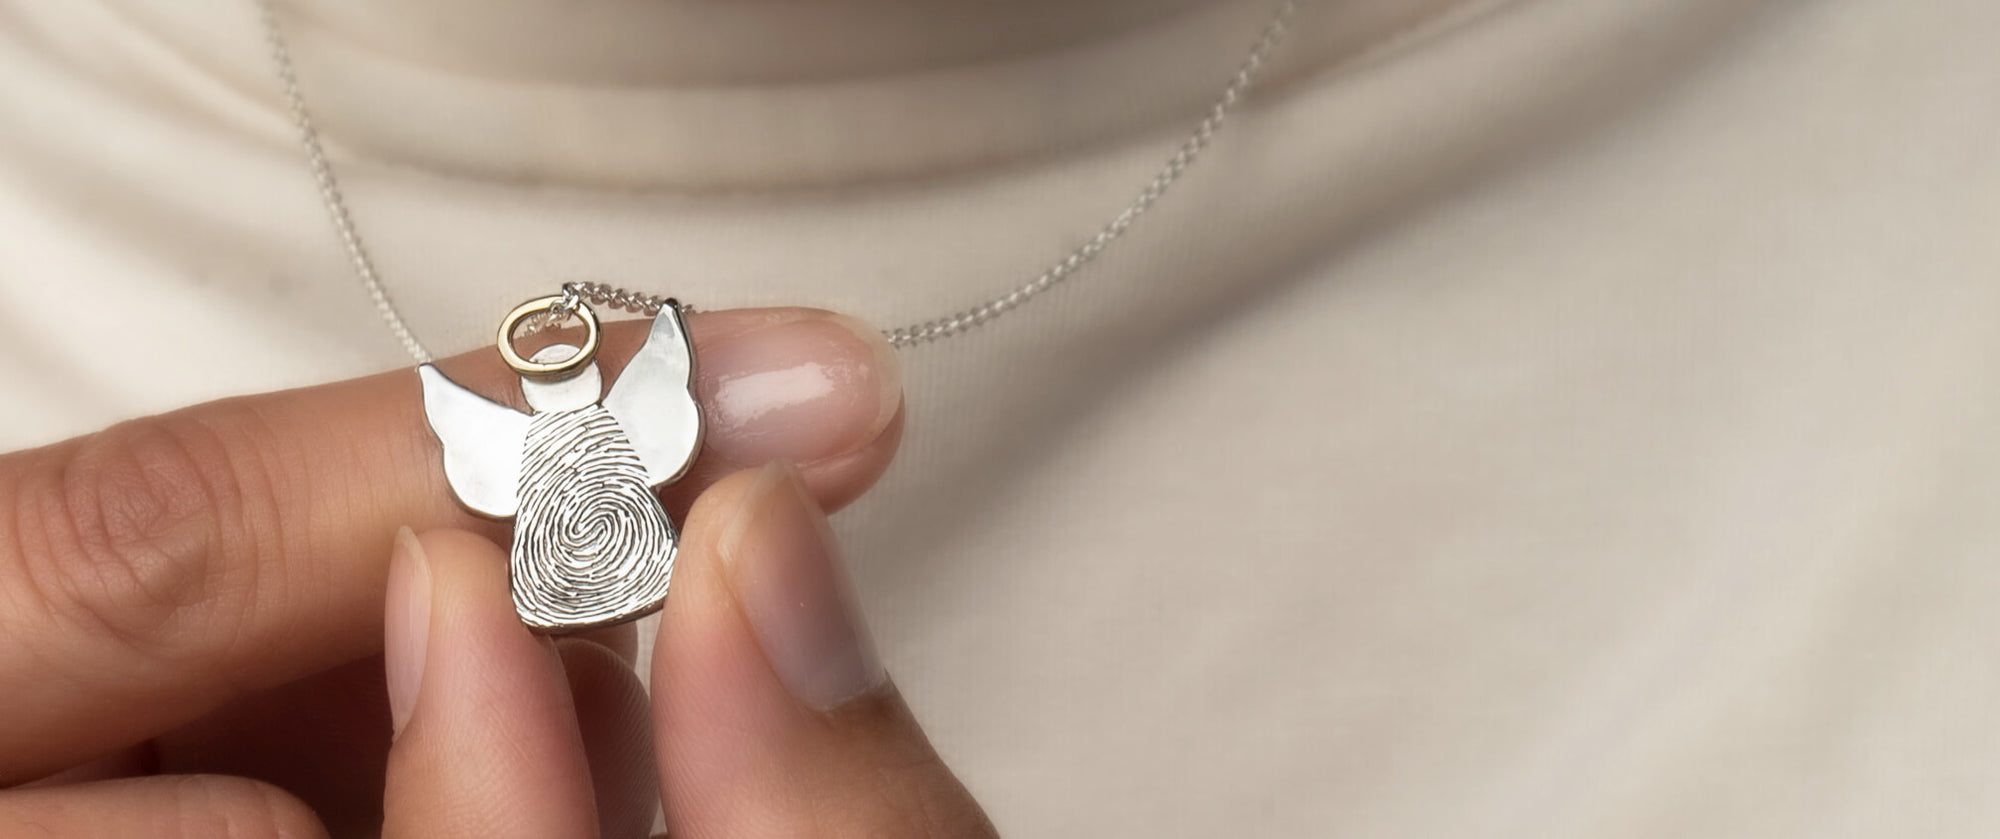 Memorial Fingerprint Jewellery in solid Gold or Silver | Hold upon Heart